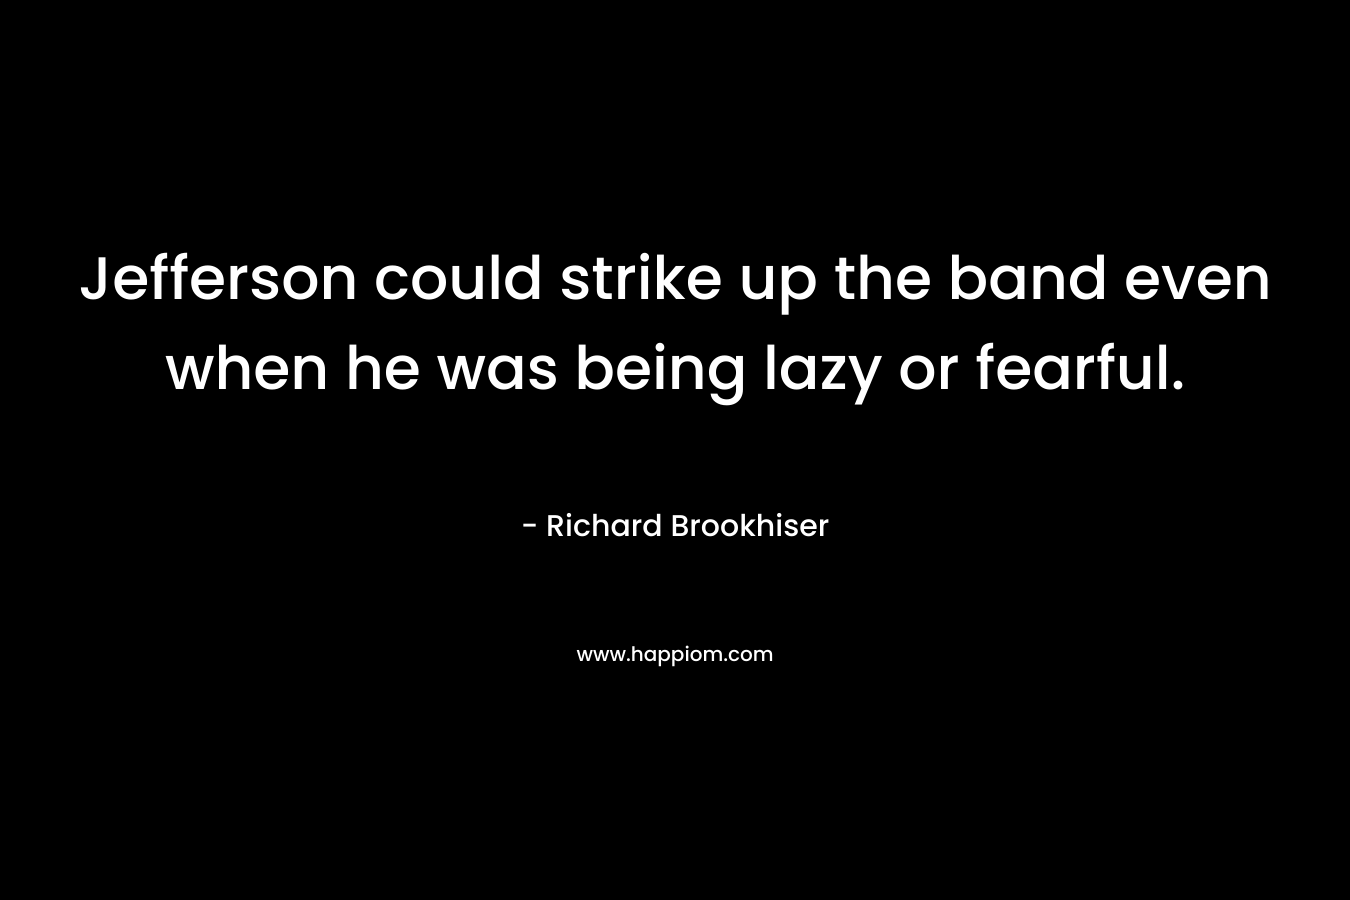 Jefferson could strike up the band even when he was being lazy or fearful. – Richard Brookhiser